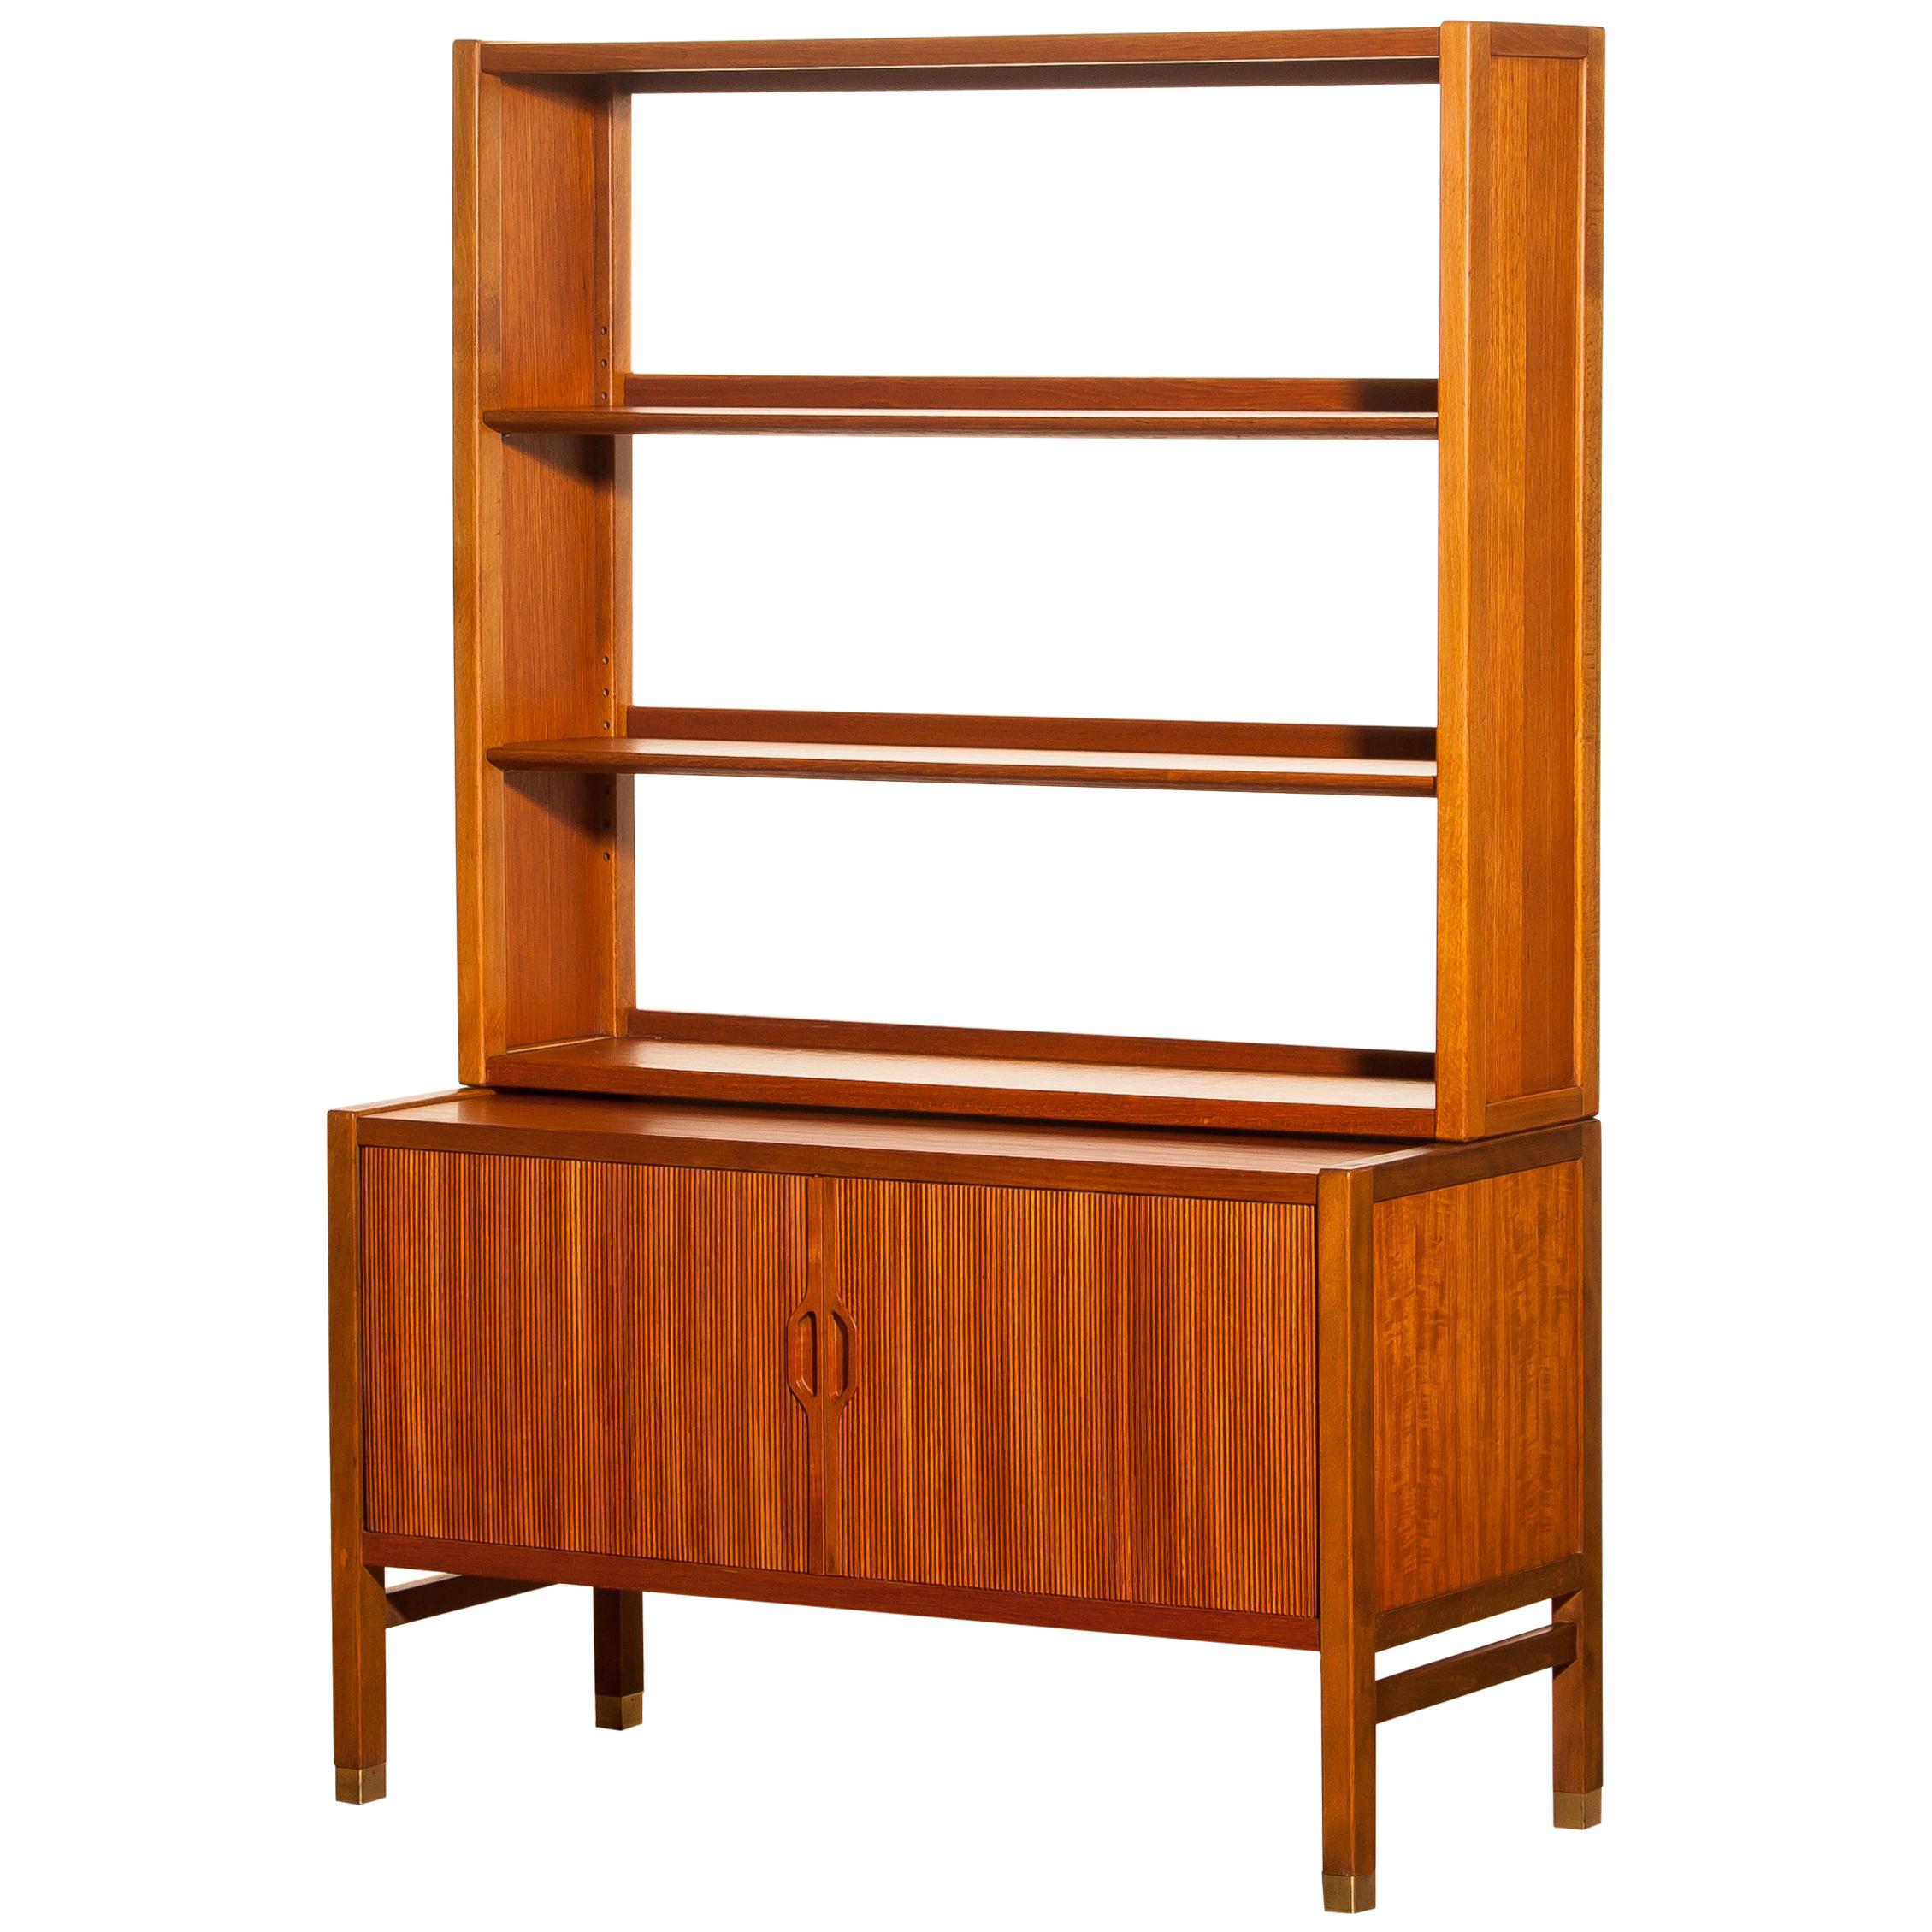 1960s, Teak Tambour Bookcase Cabinet by Carl Aksel Acking for Bodafors, Sweden